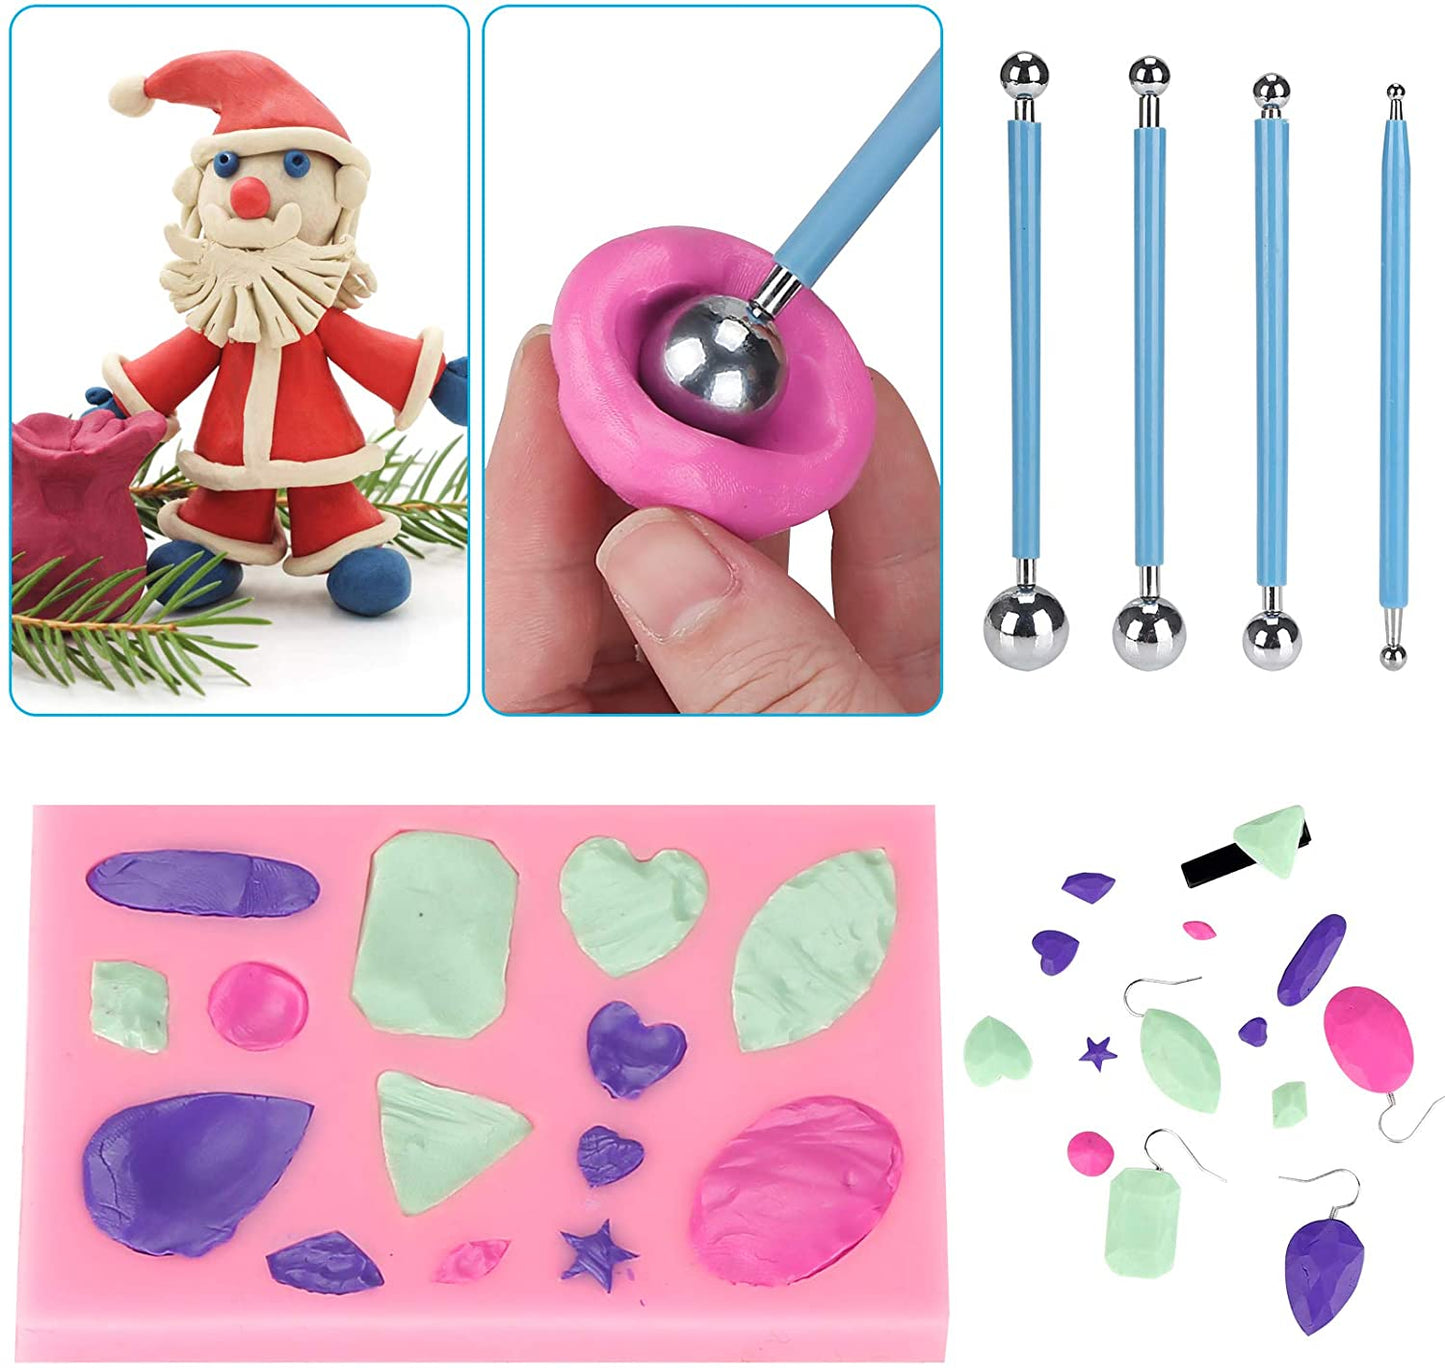 Polymer Clay Kits Oven Baked Modeling Clay Children's Hand-made Commonly  Used Sculpting Clay 19 Kinds of Sculpting Tools Non-toxic 